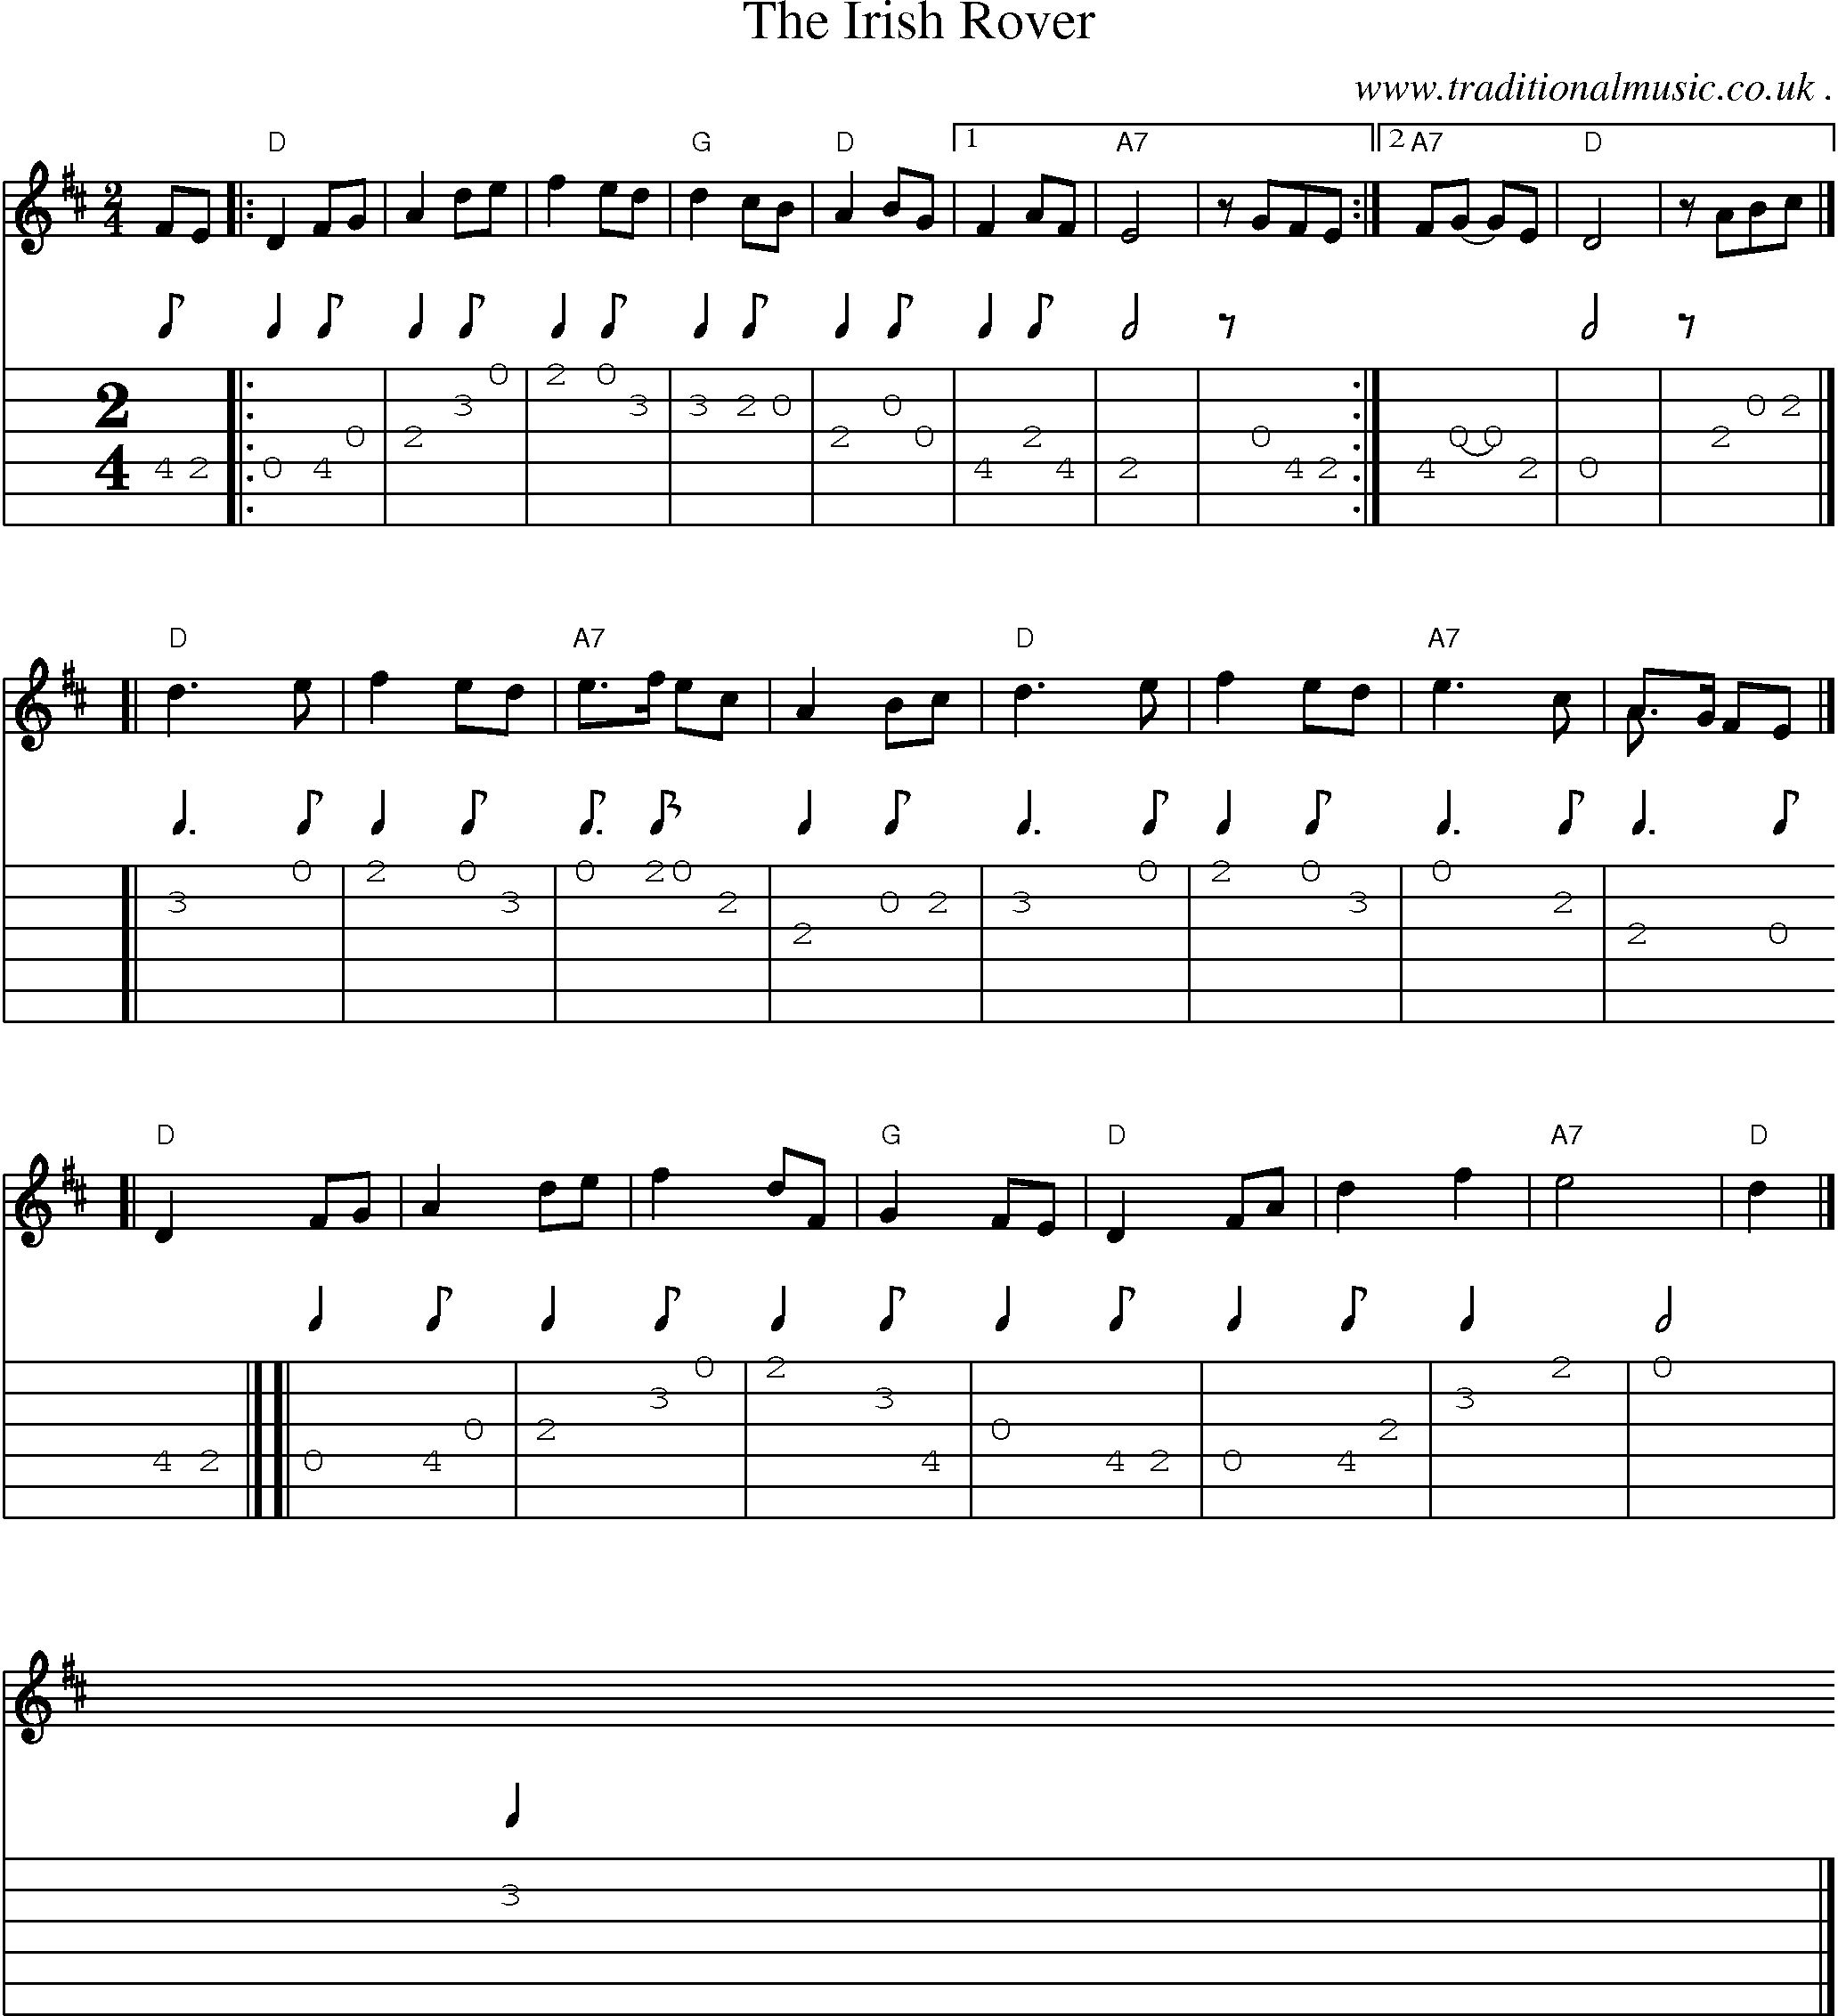 Sheet-music  score, Chords and Guitar Tabs for The Irish Rover